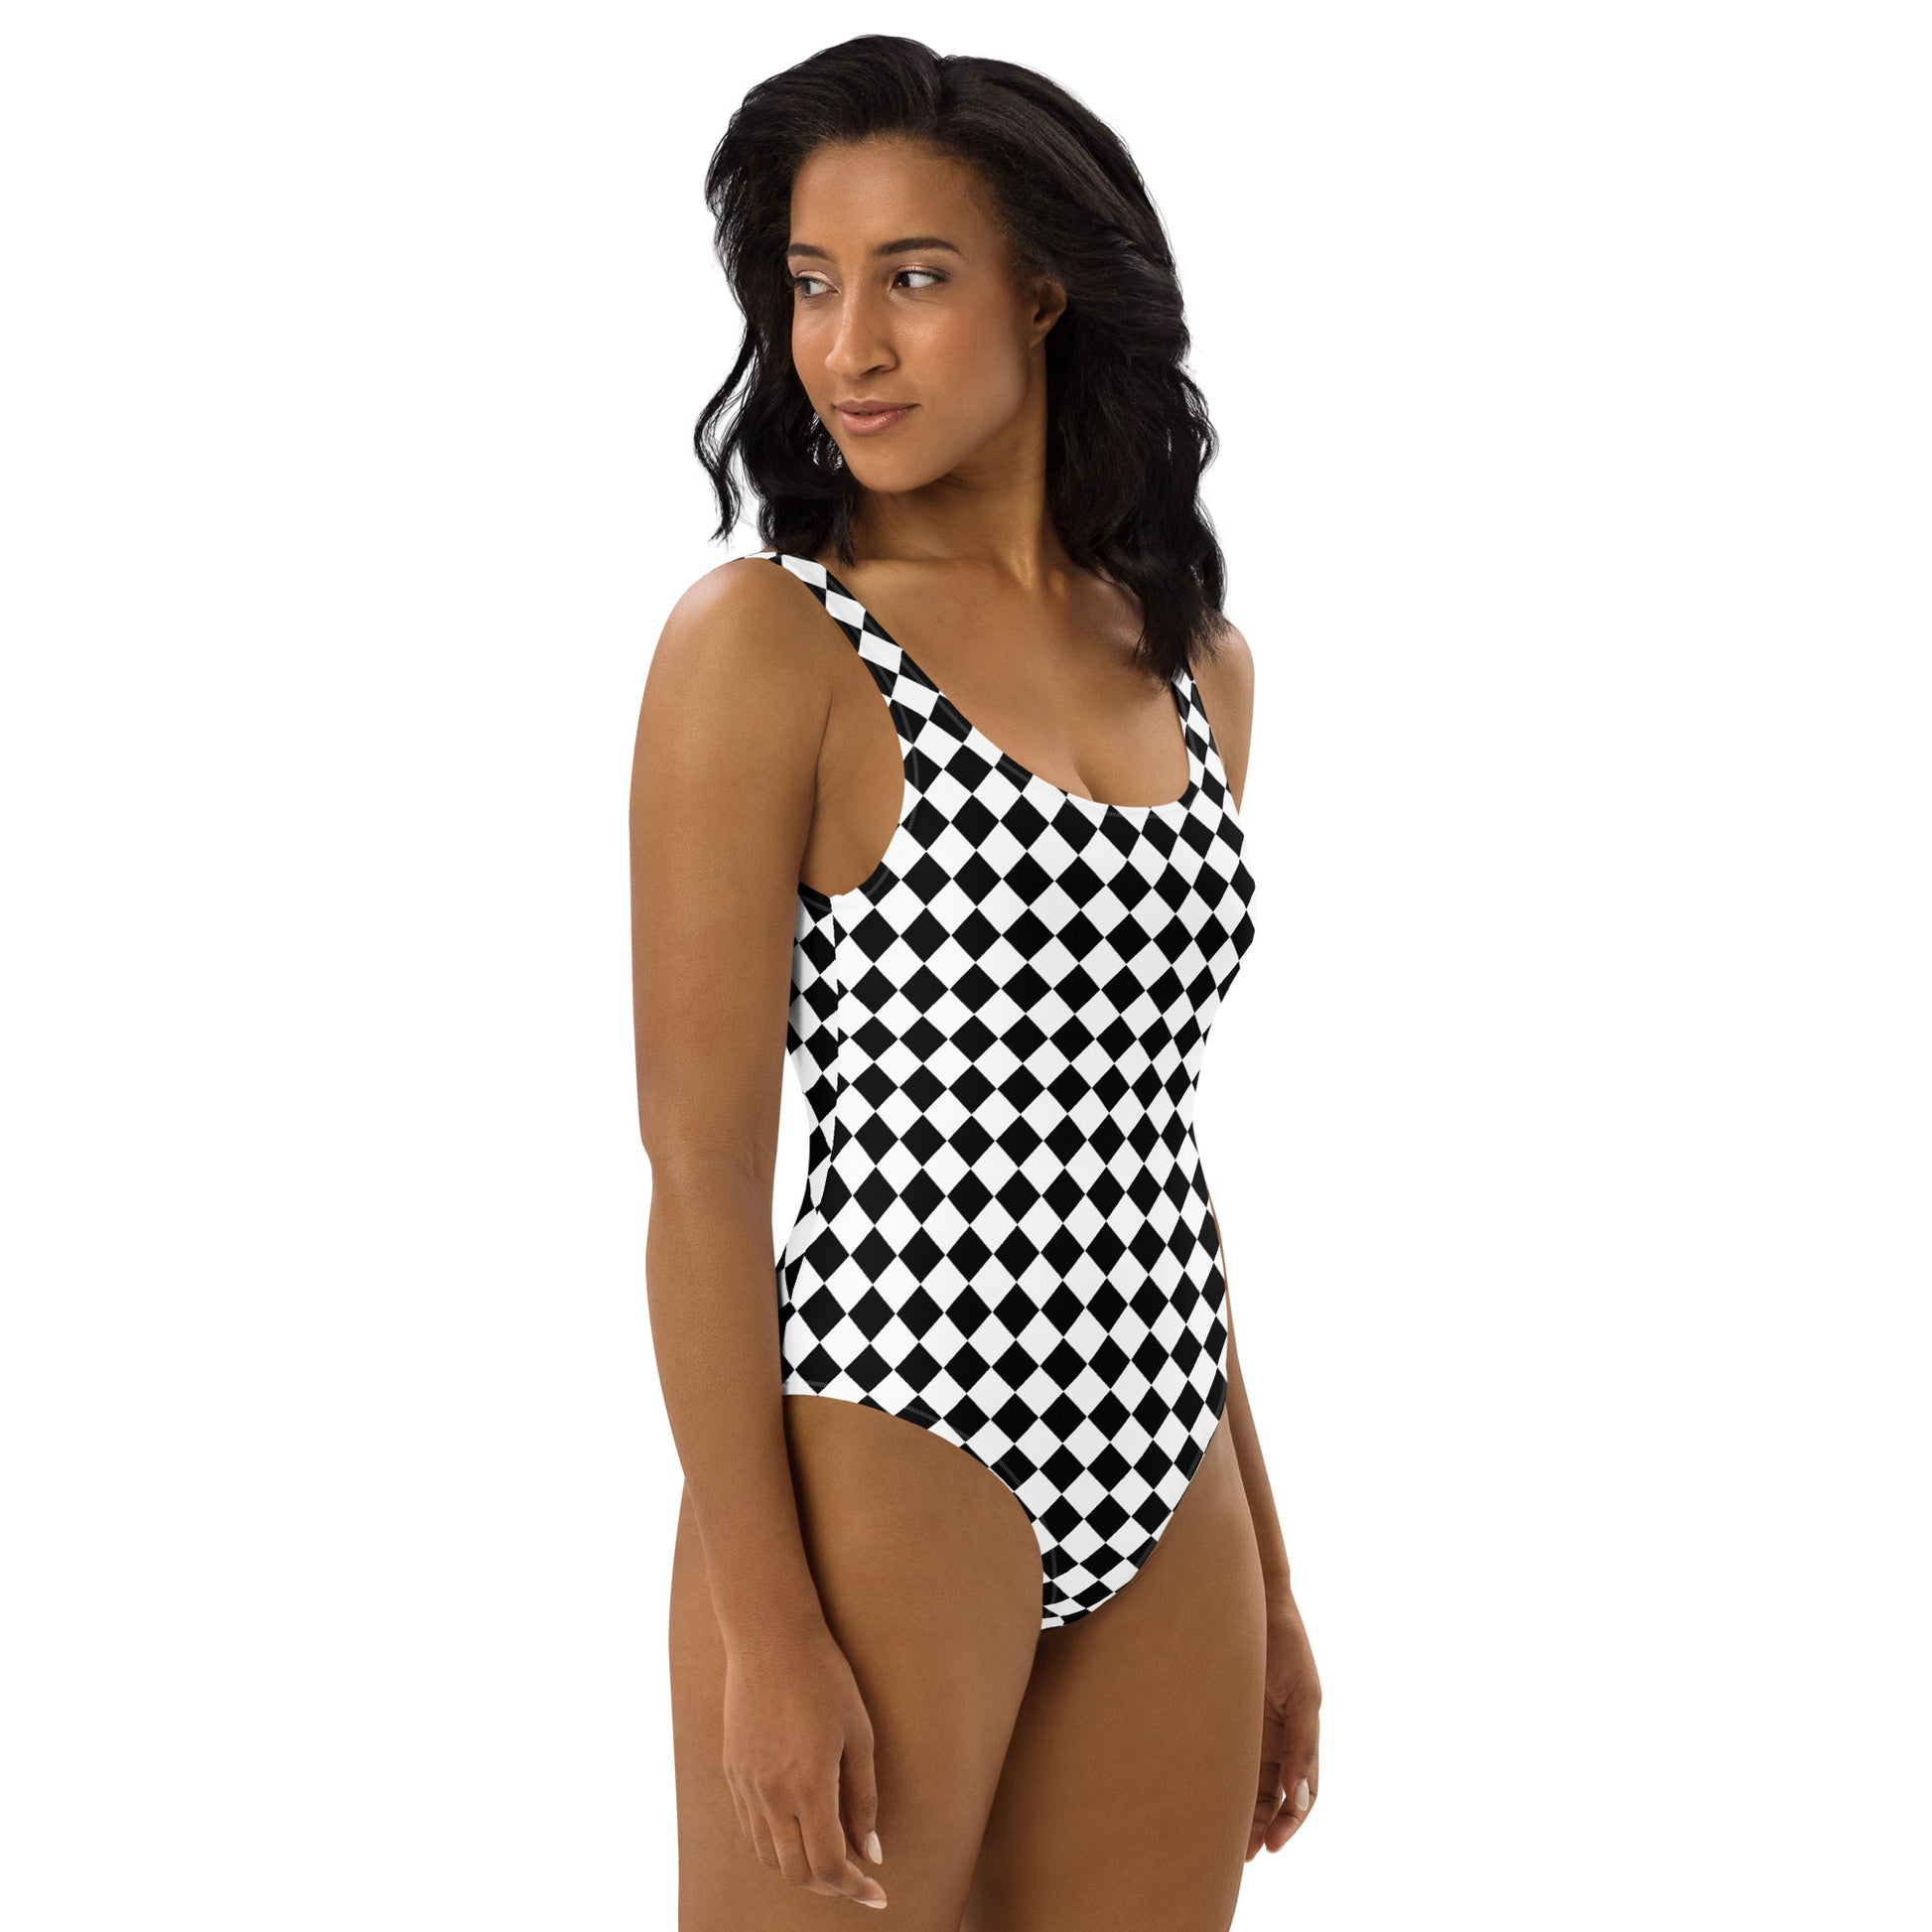 Woman with swimsuit with a print of a chessboard